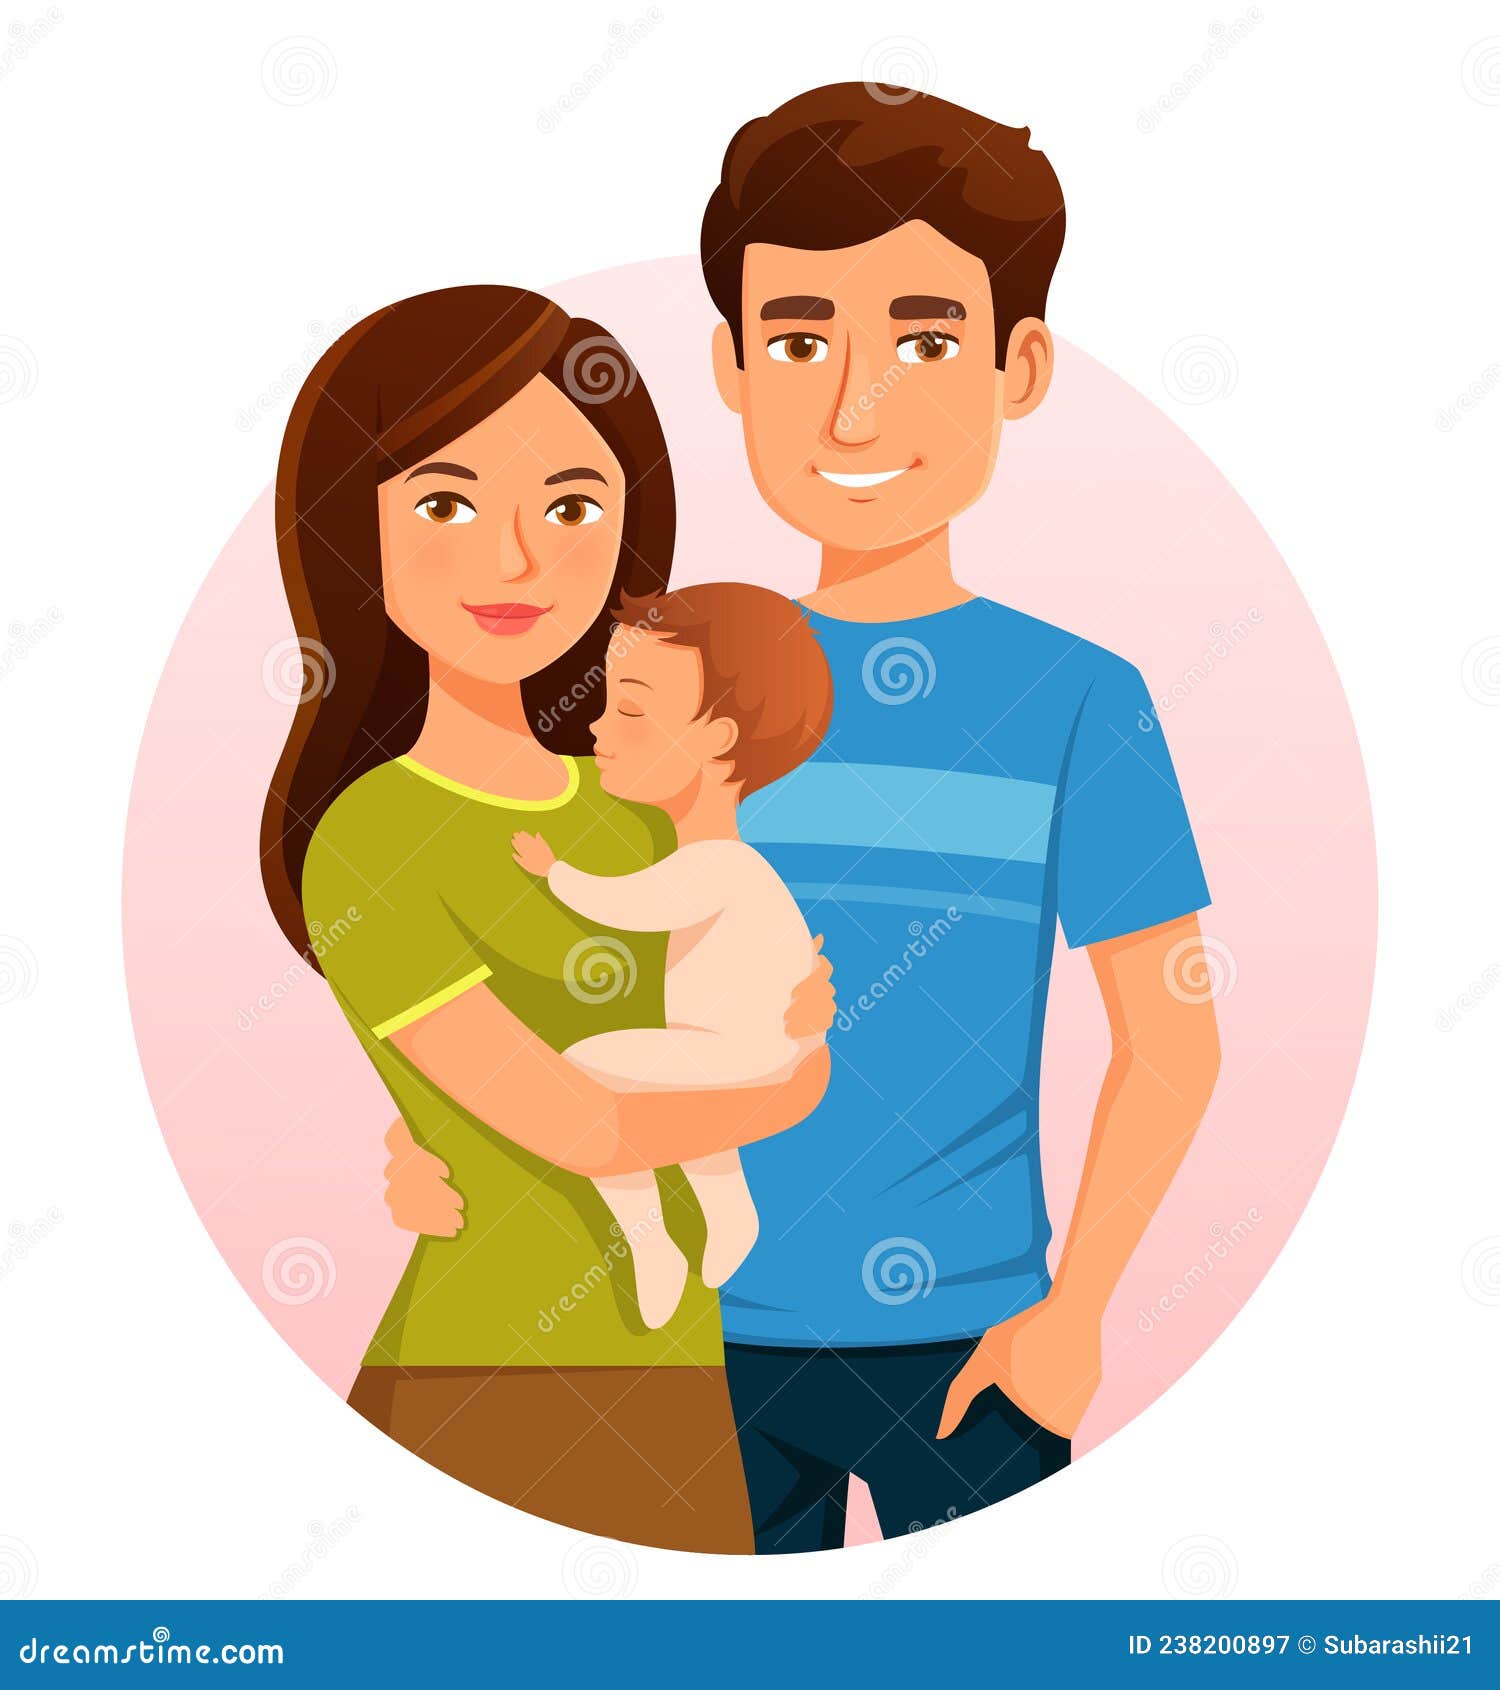 Cute Cartoon Illustration of a Happy Young Family Stock Vector -  Illustration of woman, parenting: 238200897